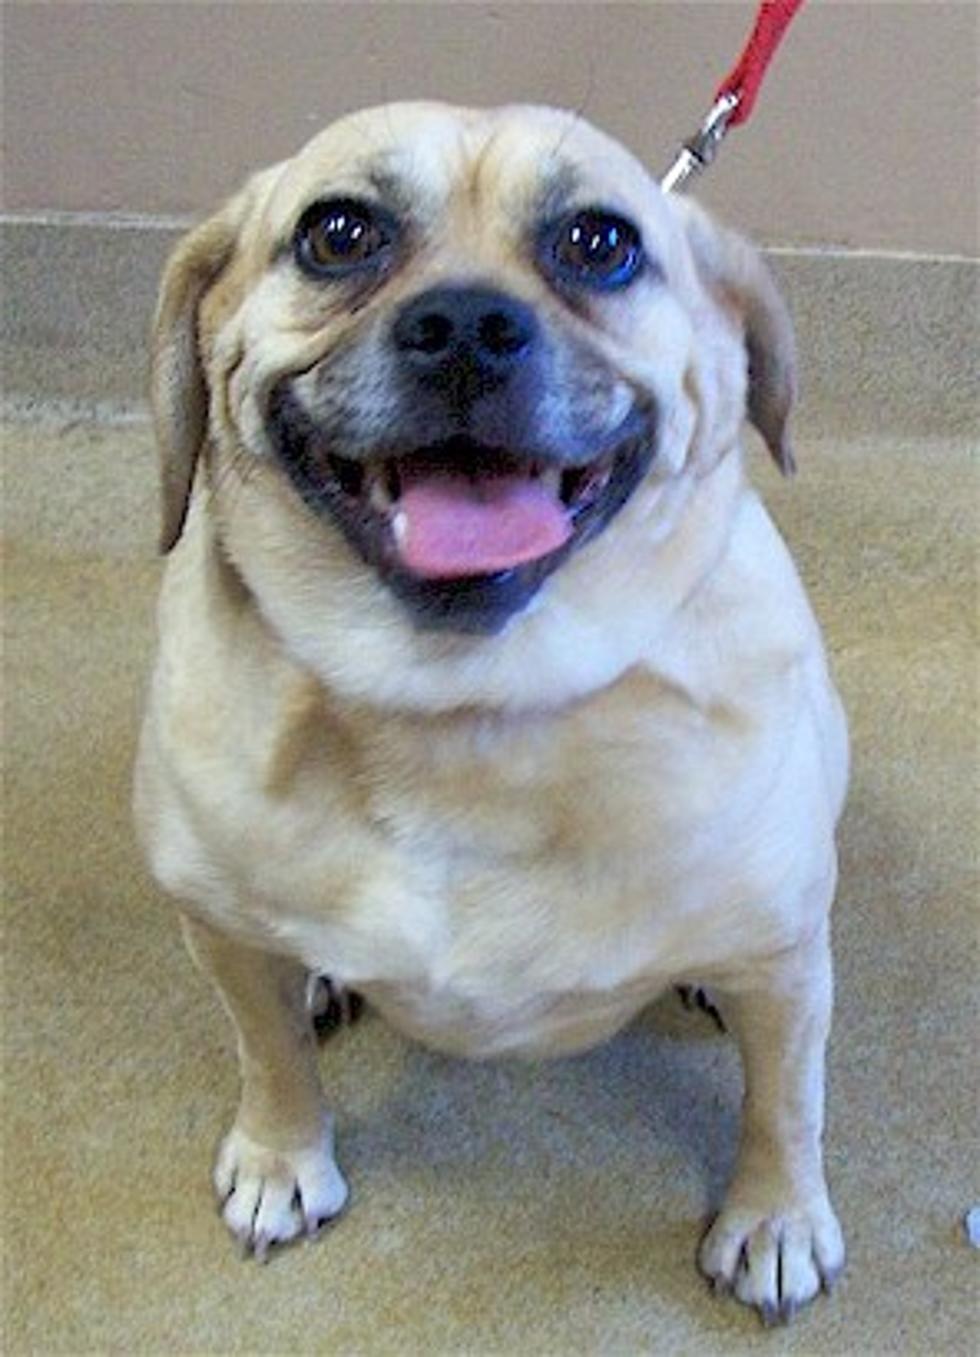 Pet Patrol: Kida the Puggle’s Looking for New Digs